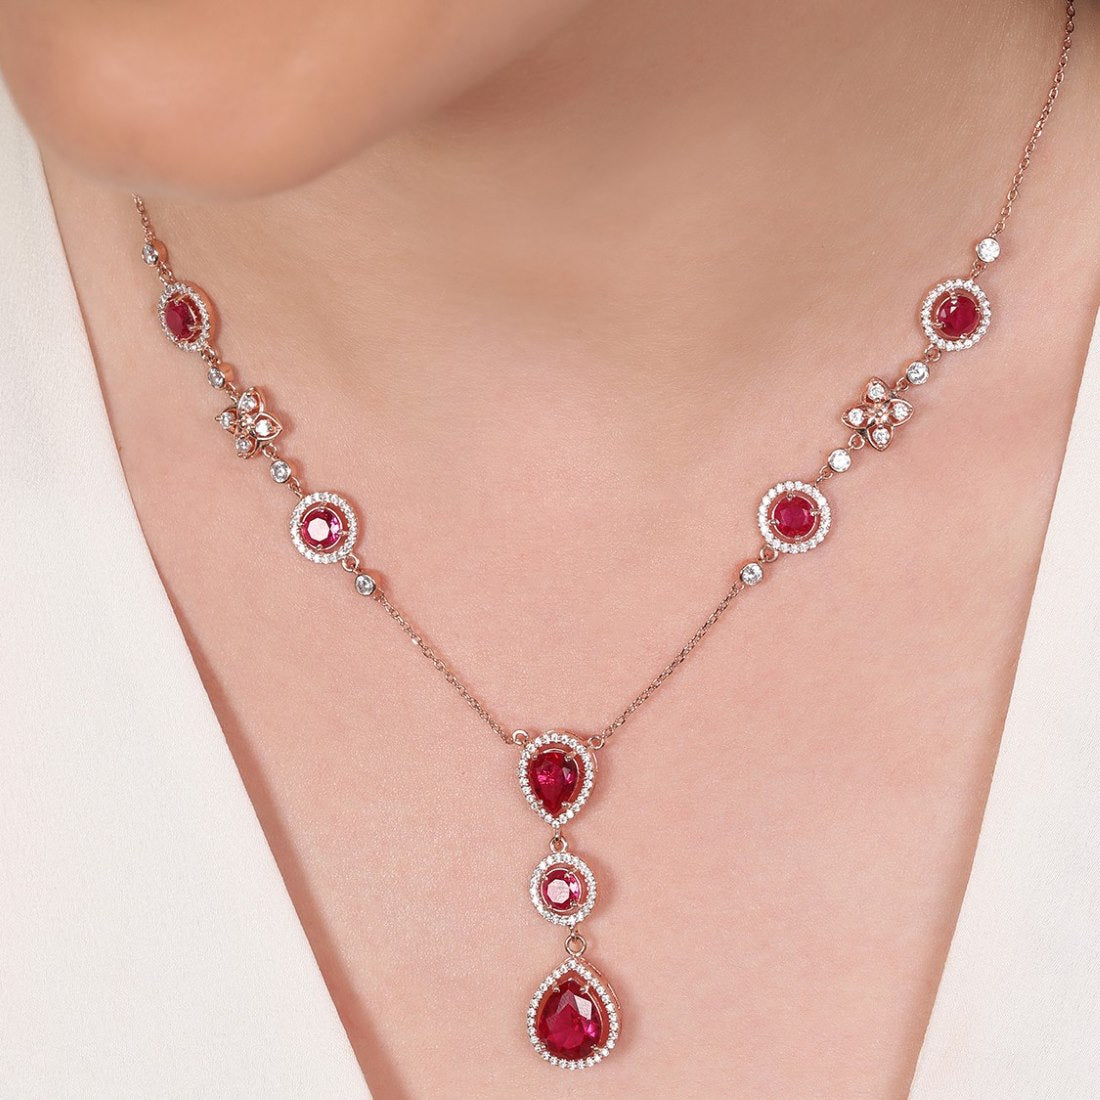 Alluring Mystery Rose Gold-Plated Dark Pink Solitaire Necklace